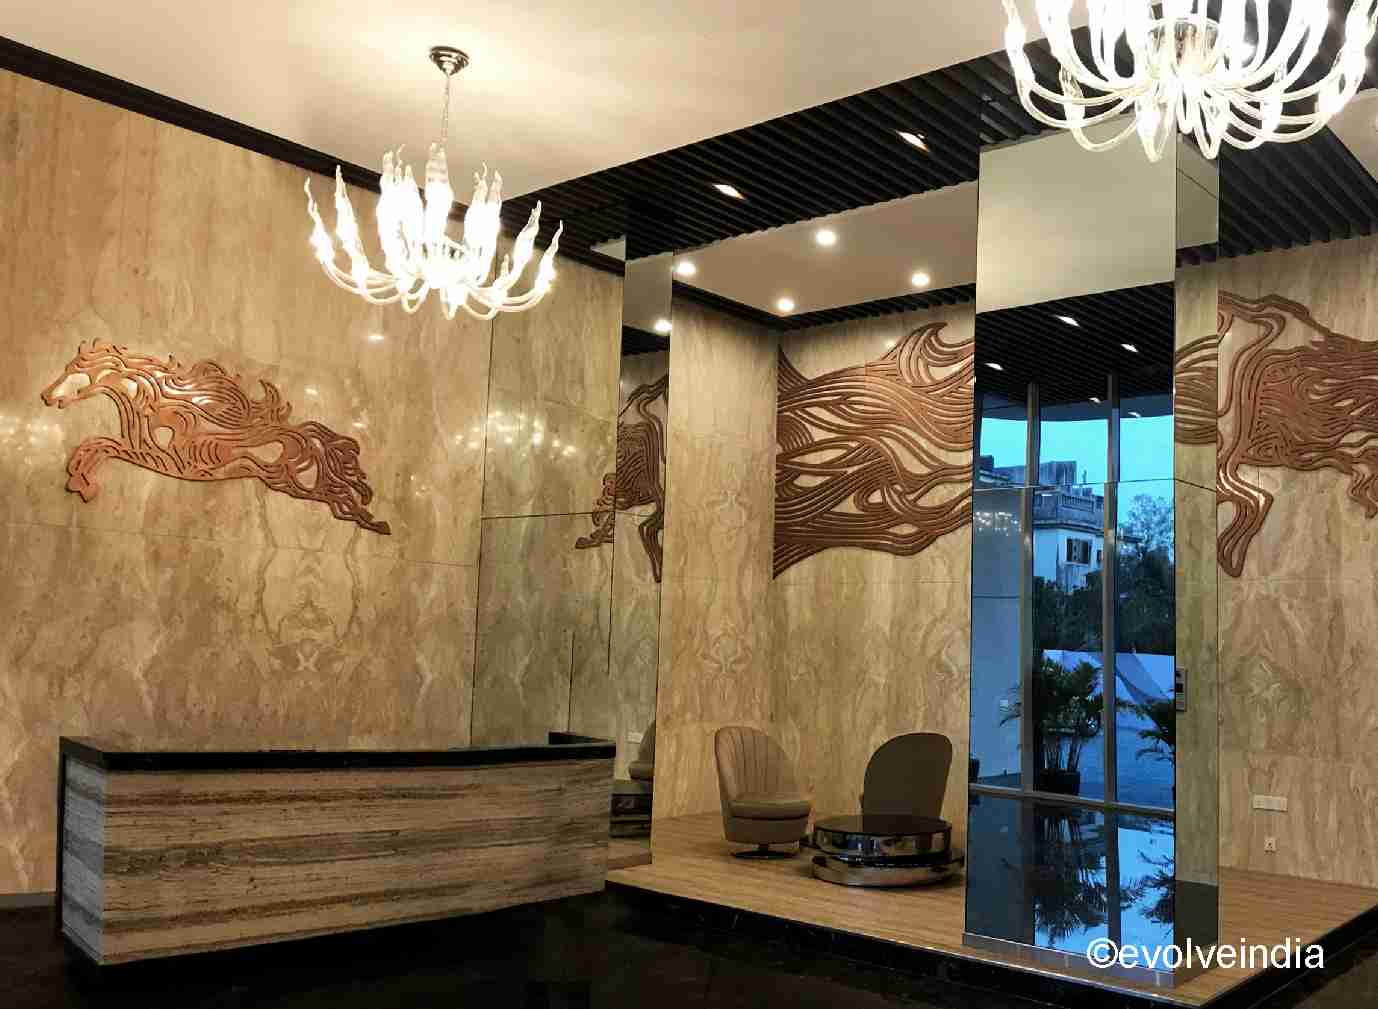 This bespoke and unique wall art, fabricated using Evolve India’s liquid metal copper finish